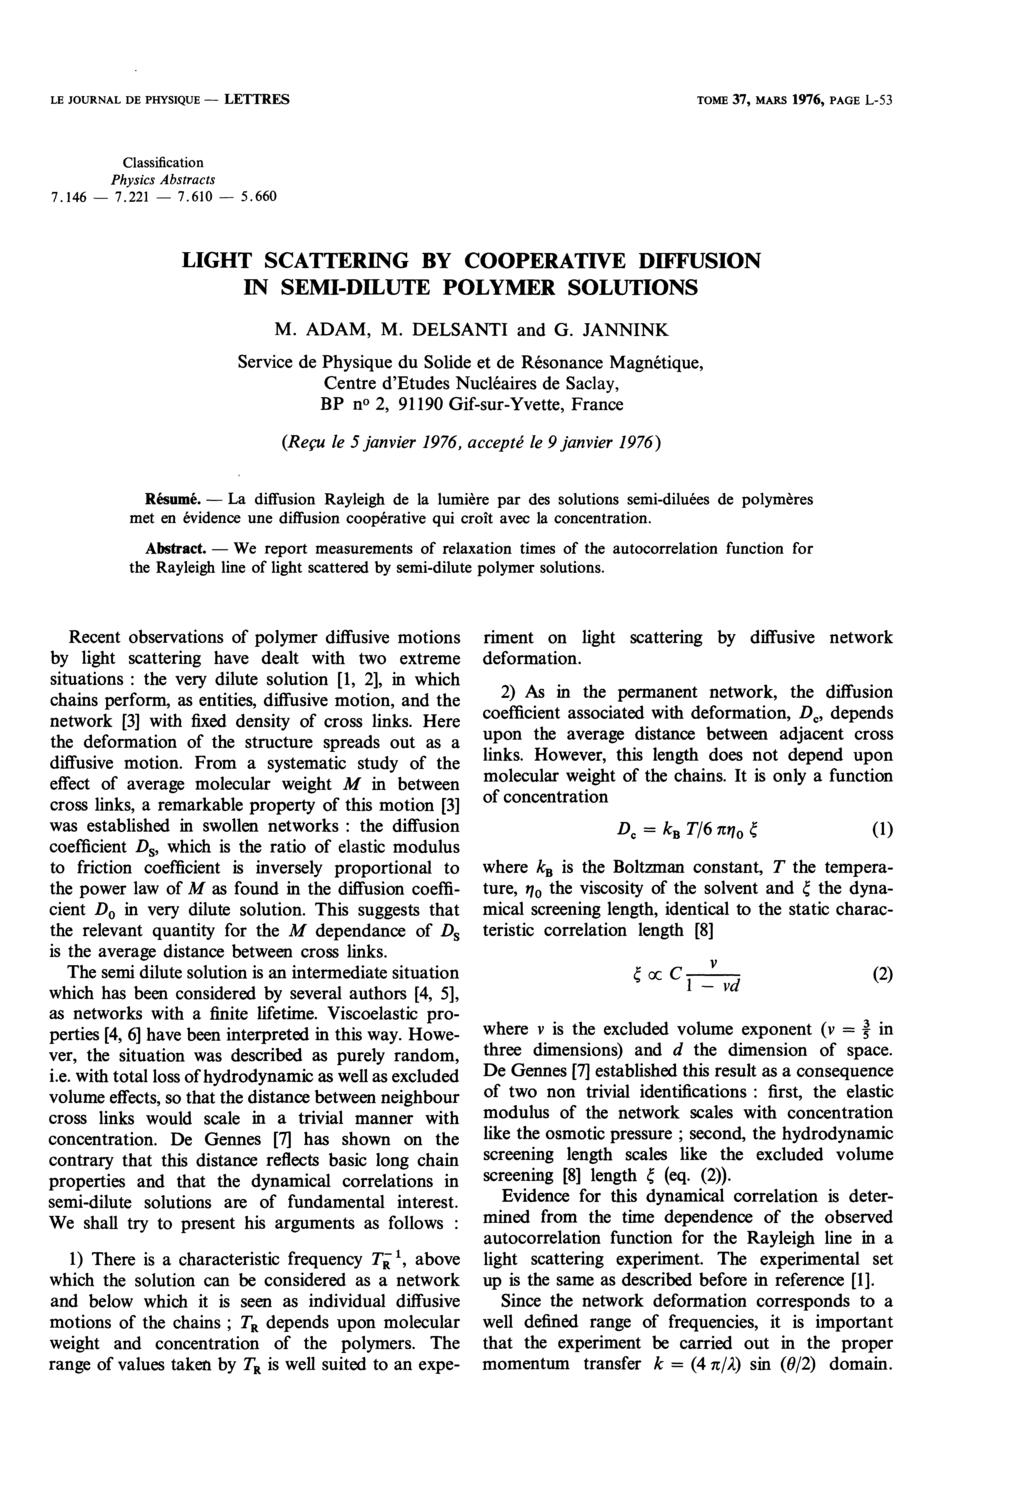 LETTRES La We LE JOURNAL DE PHYSIQUE TOME 37, MARS 1976 L53 Classification Physics Abstracts 7.1467.2217.6105.660 LIGHT SCATTERING BY COOPERATIVE DIFFUSION IN SEMIDILUTE POLYMER SOLUTIONS M. ADAM, M.